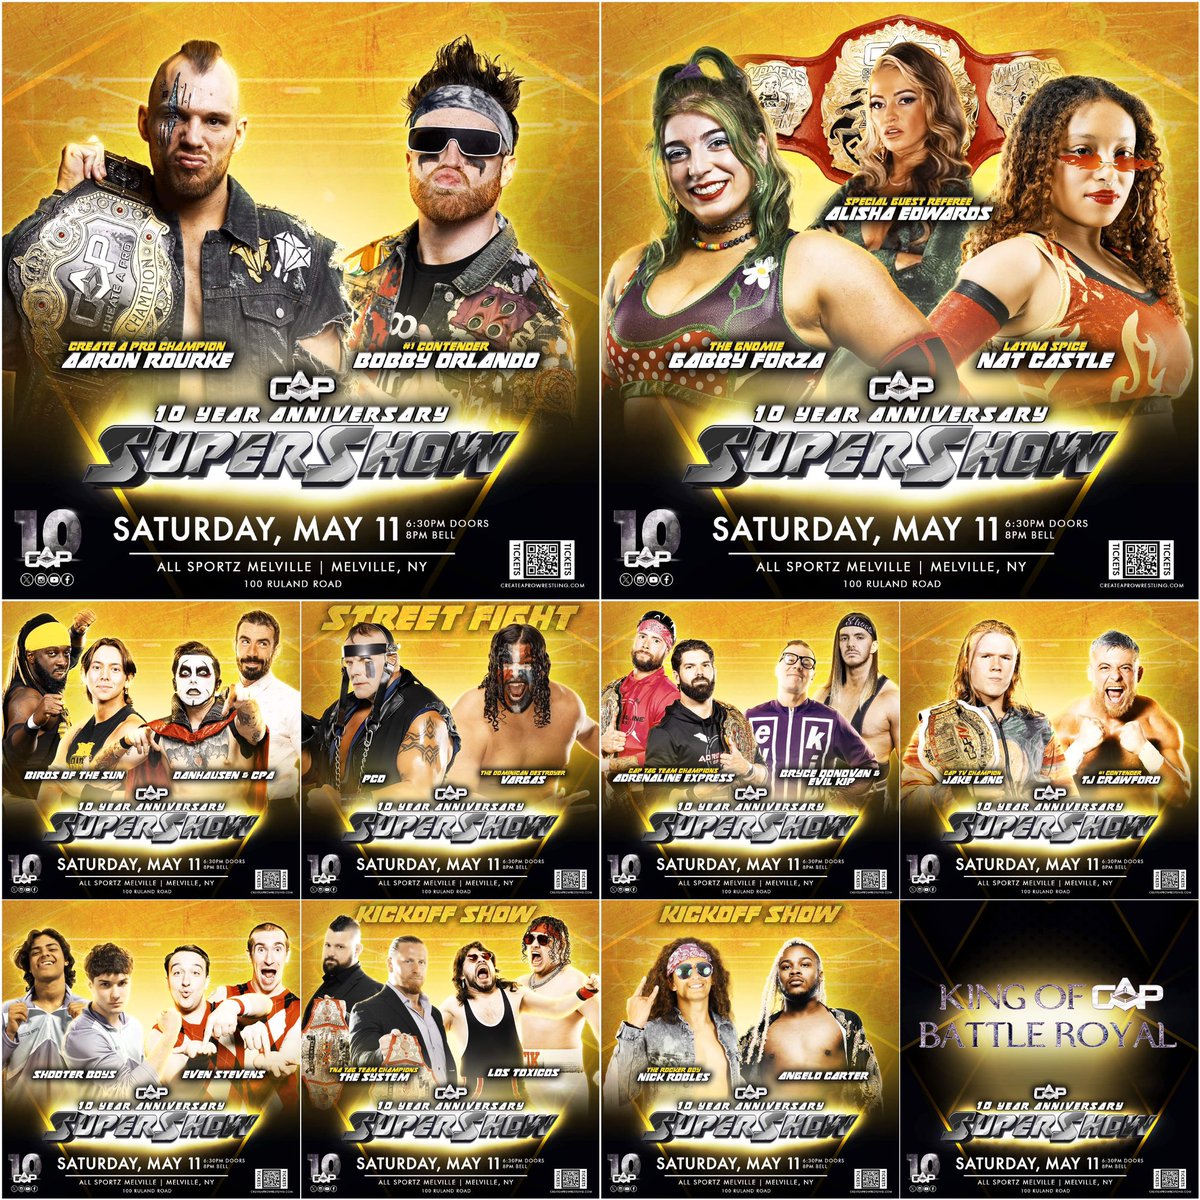 🚨THIS SATURDAY🚨 The Create A Pro 10 Year Anniversary Super Show will be the biggest event in CAP history! What match are you most excited to see? Limited tickets remain, secure your spot now! #CAP10 🎟GET YOUR TICKETS NOW🎟 eventbrite.com/e/create-a-pro…